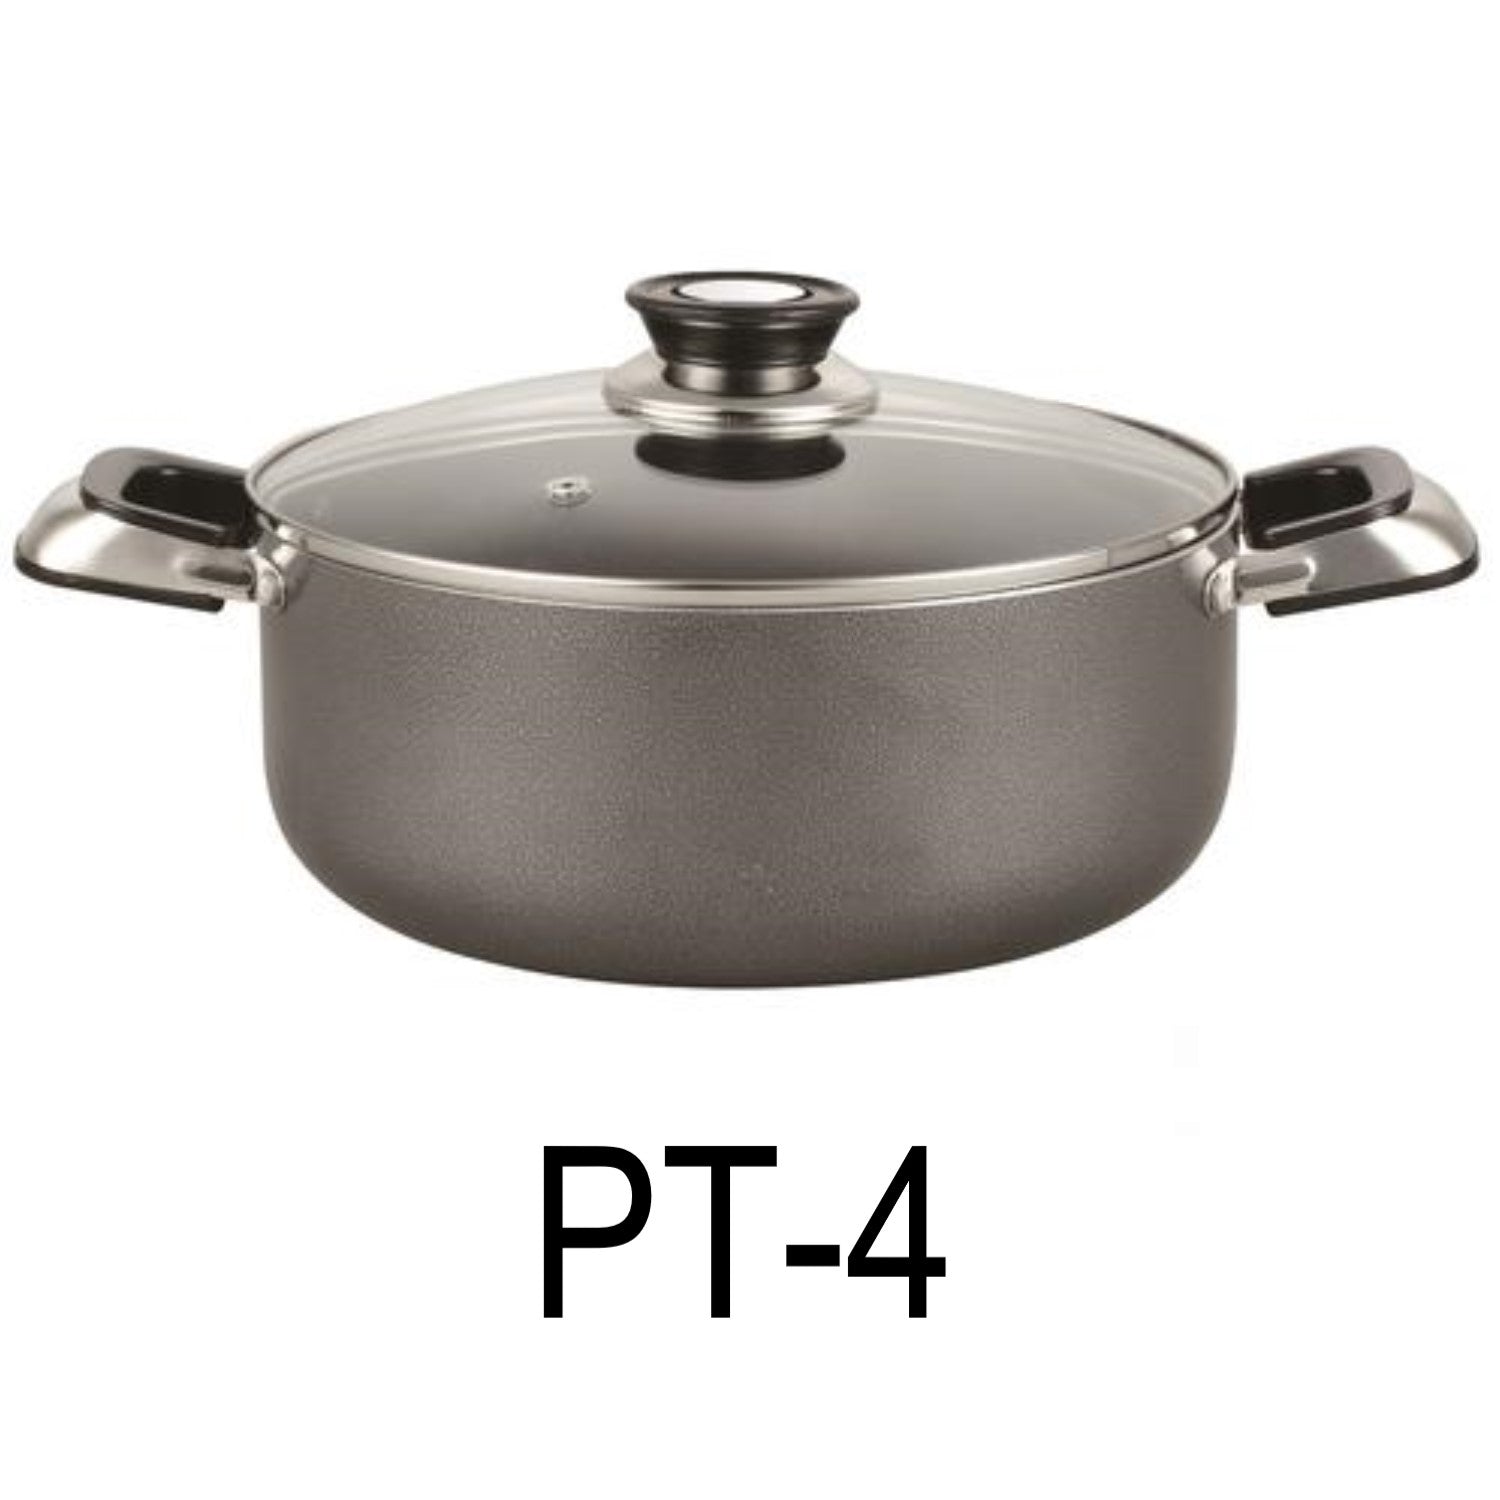 4 qt Non-Stick Stockpot with Glass Lid, Clear